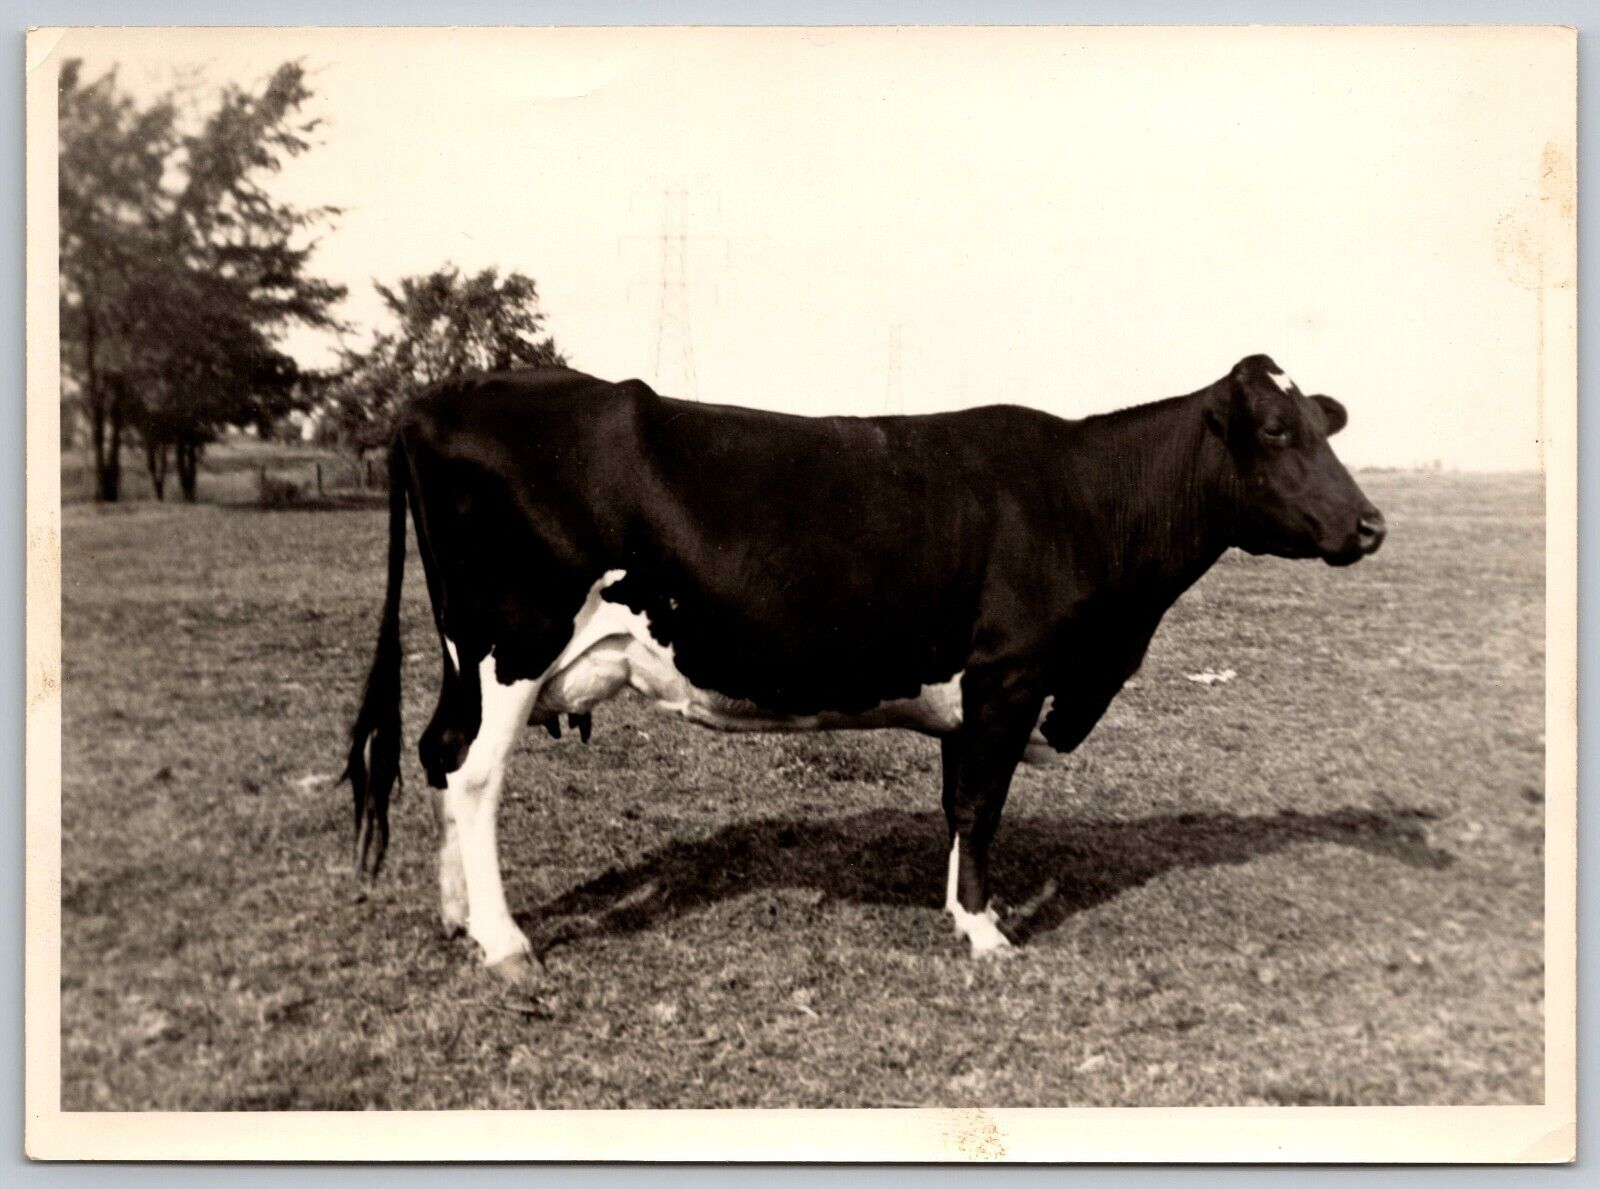 Vtg Photo - Holstein cow standing in a field 5 X 7 inches | Circa 1940s